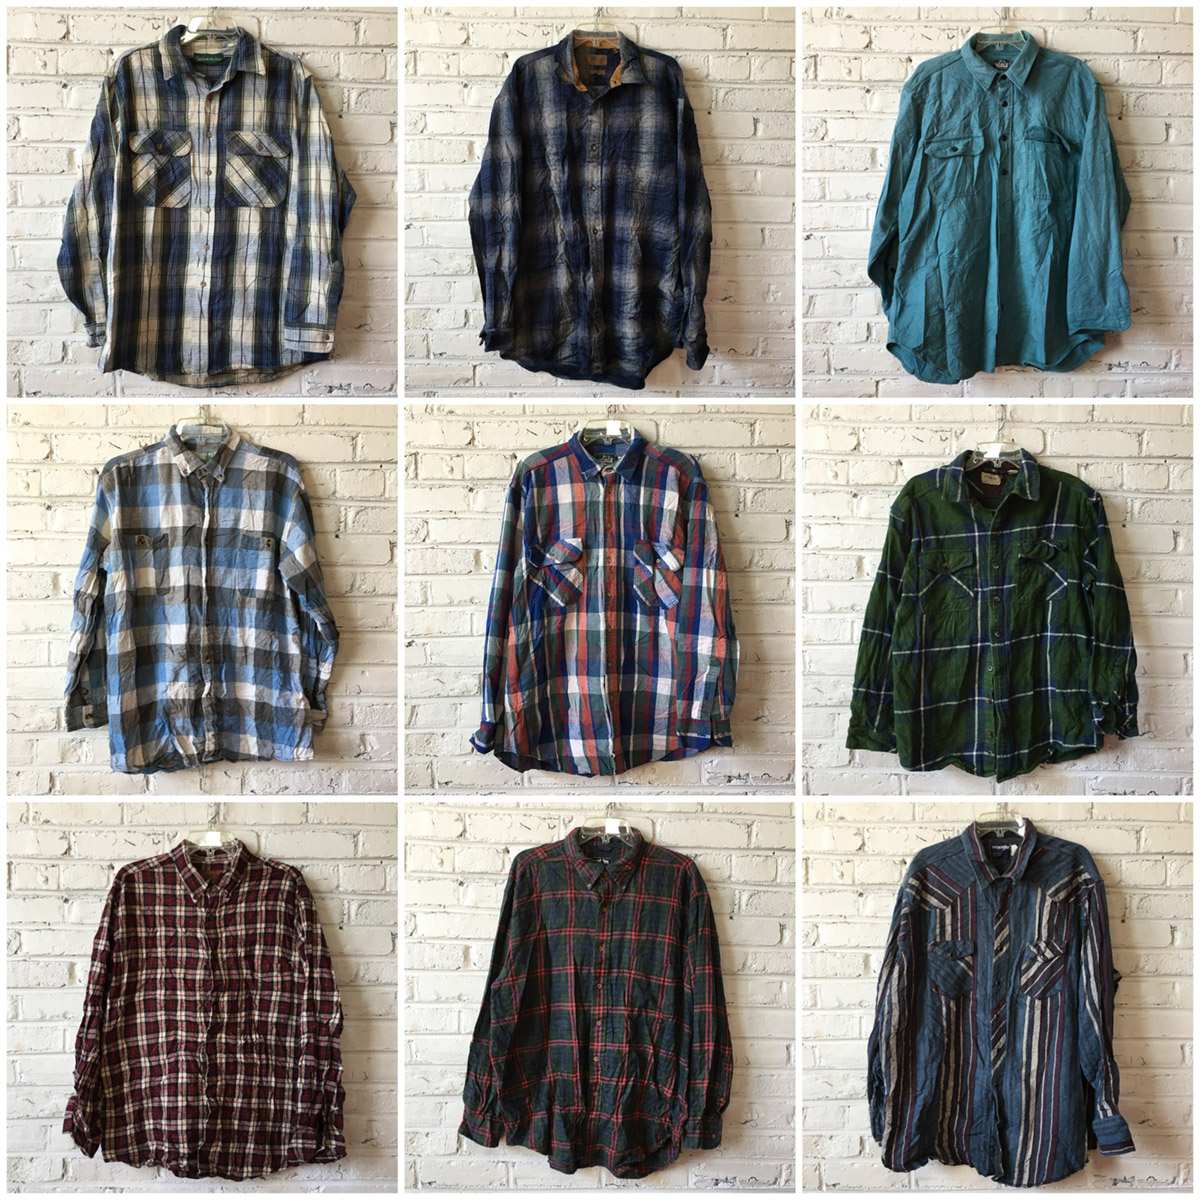 snelheid val Zaklampen Flannel Shirts (mixed styles) by the Pound: Bulk Vintage Clothing